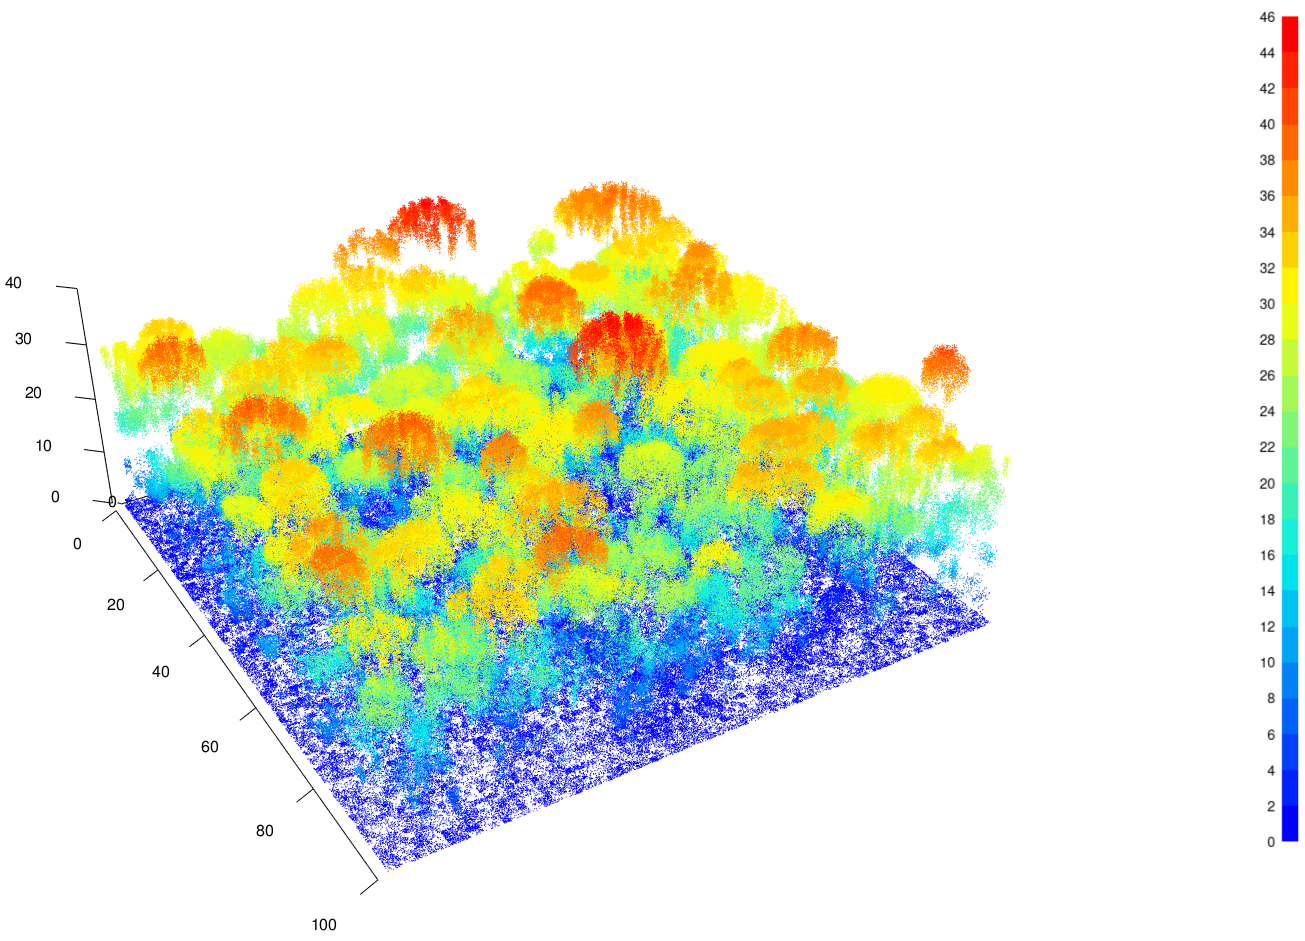 Figure 2: Cloud of points obtained through a virtual airborne lidar scan of a forest scene simulated with TROLL. The horizontal axes represent the X-axis and Y-axis (in metres) and the vertical axis represents height (in metres). The thermal colour scale indicates the height of the points in the cloud, from 0 m in dark blue to 40 m in red.